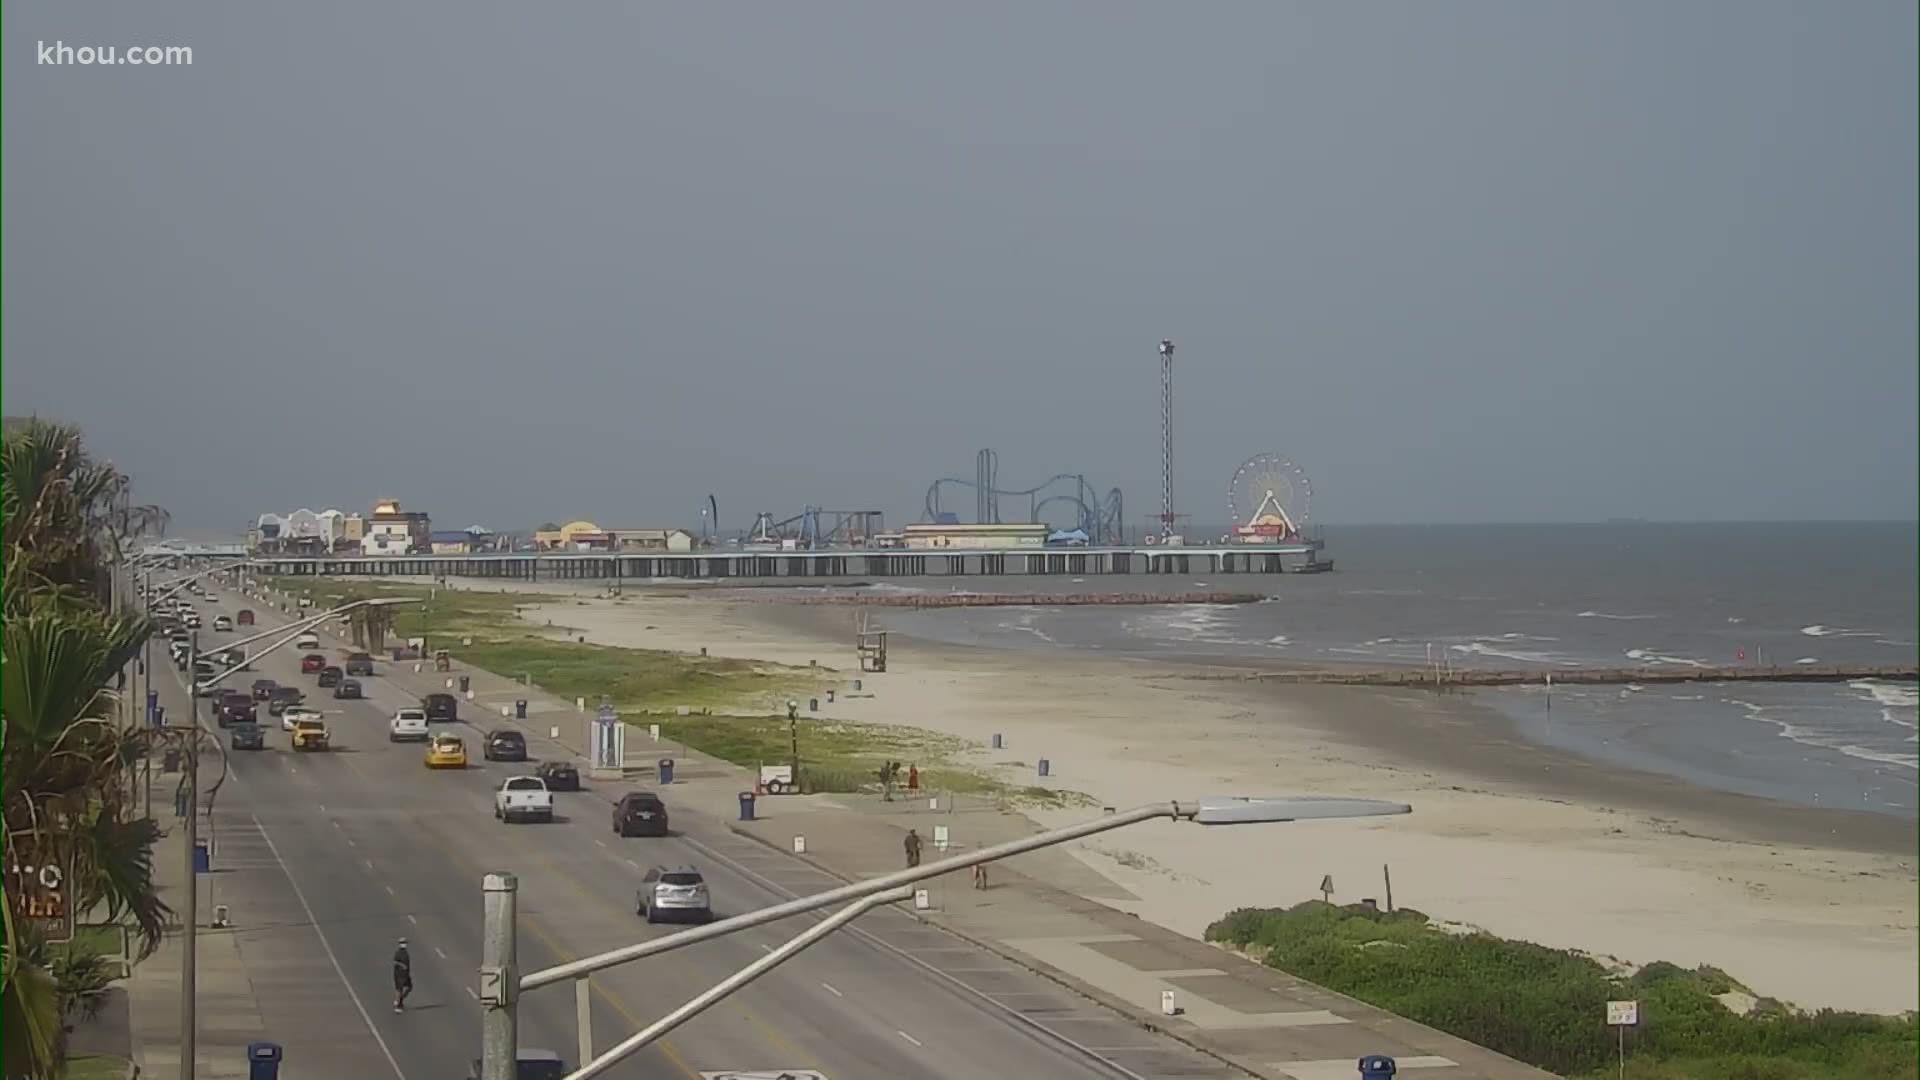 Crowds usually flock to Galveston Island beaches for Fourth of July weekend, but that's not the case this year as city leaders closed beaches due to COVID-19.